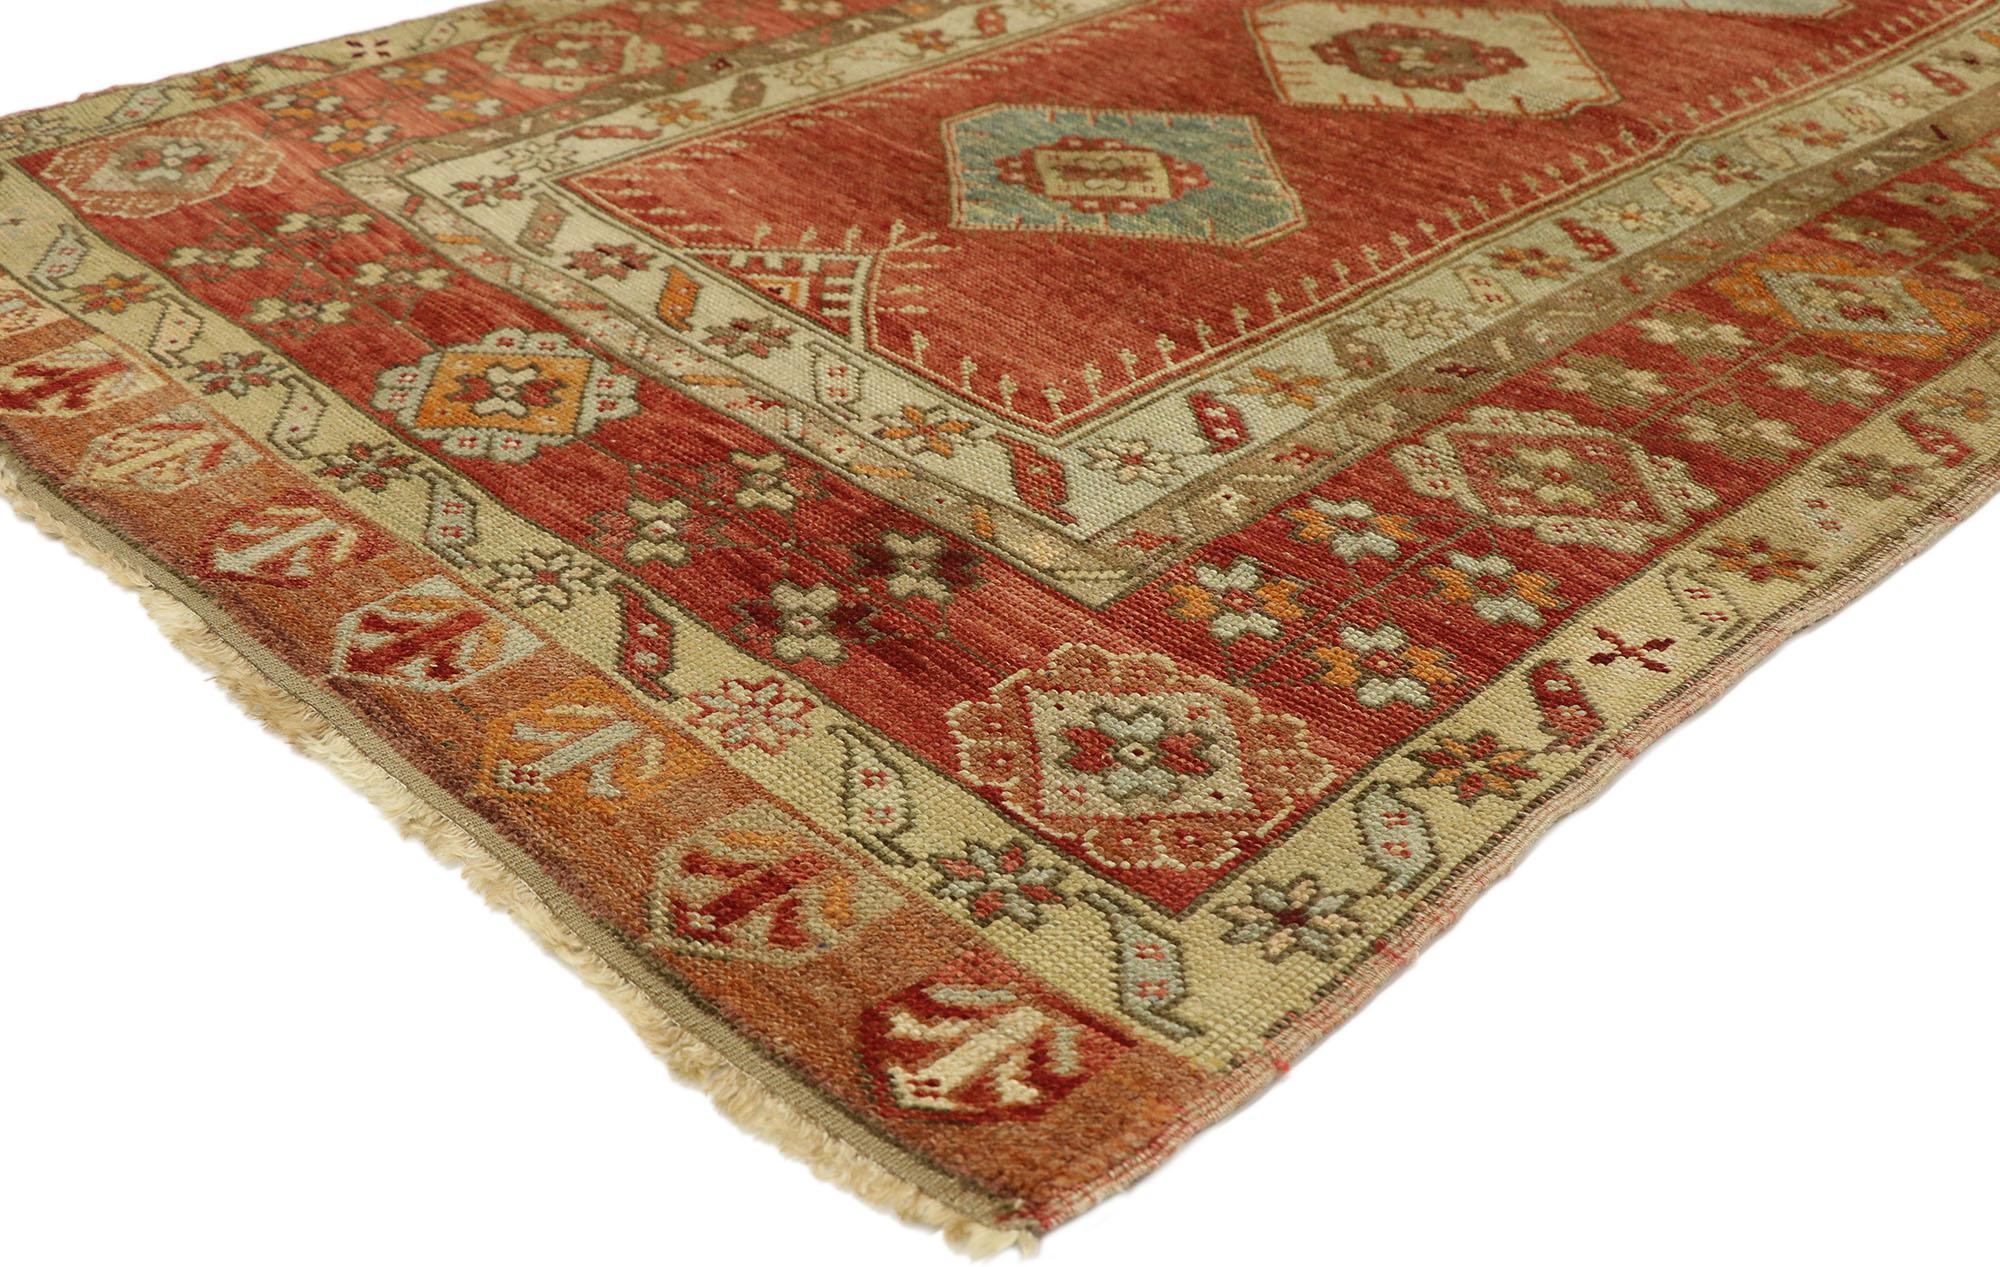 50916 vintage Turkish Oushak rug with Rustic Artisan Spanish Colonial style. Warm and inviting, this hand knotted wool vintage Turkish Oushak rug features three hexagonal medallions spread across an abrashed brick red field. It is enclosed with a